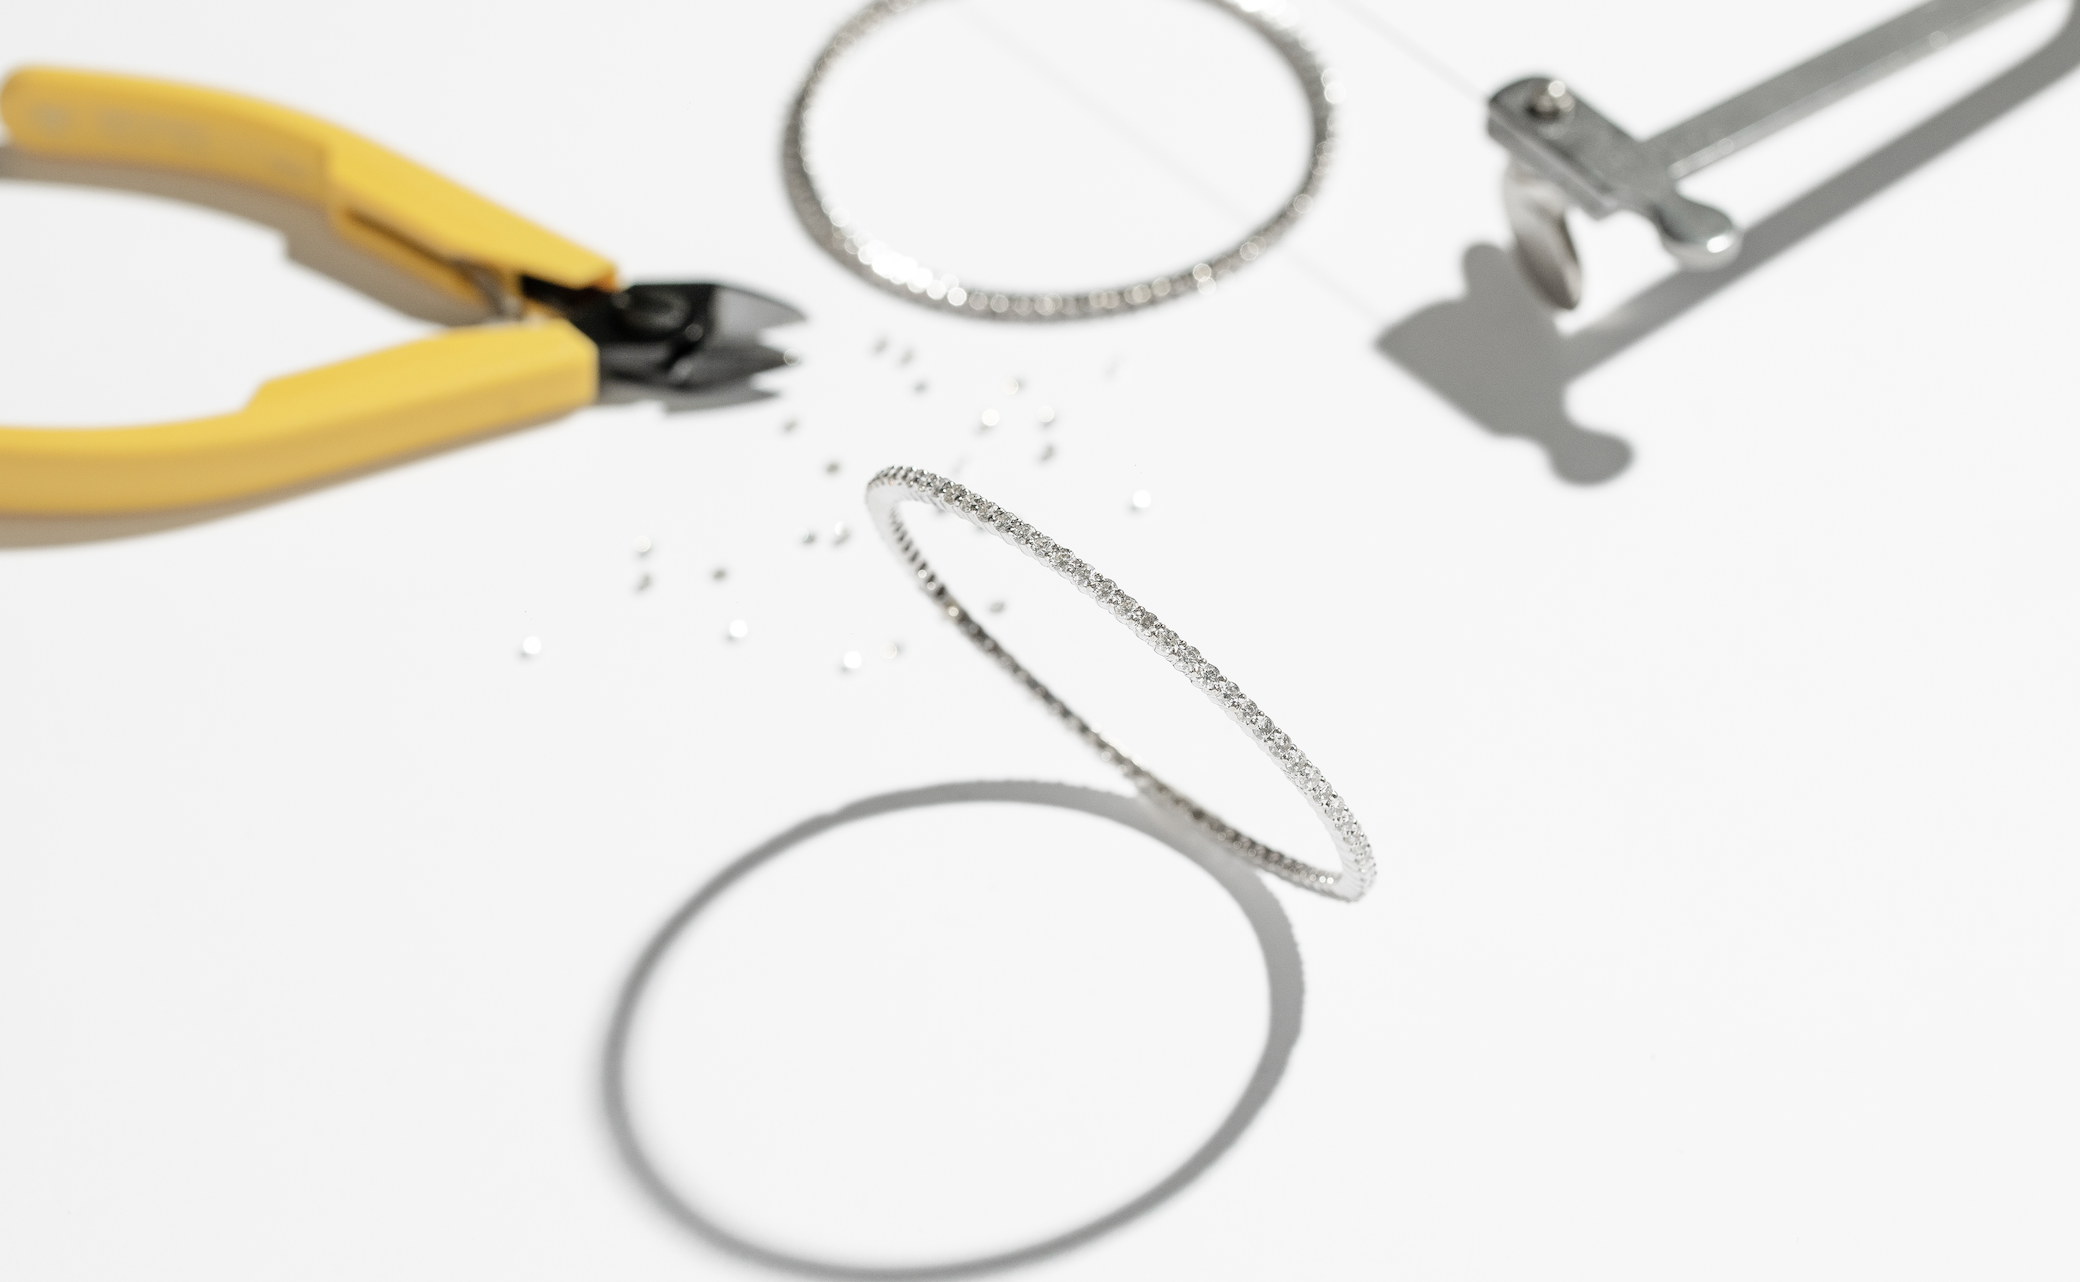 ILA SODHANI's Lisa Bangles being assembled; shown on a white background with loose diamonds, wire cutters, and gauge tool.